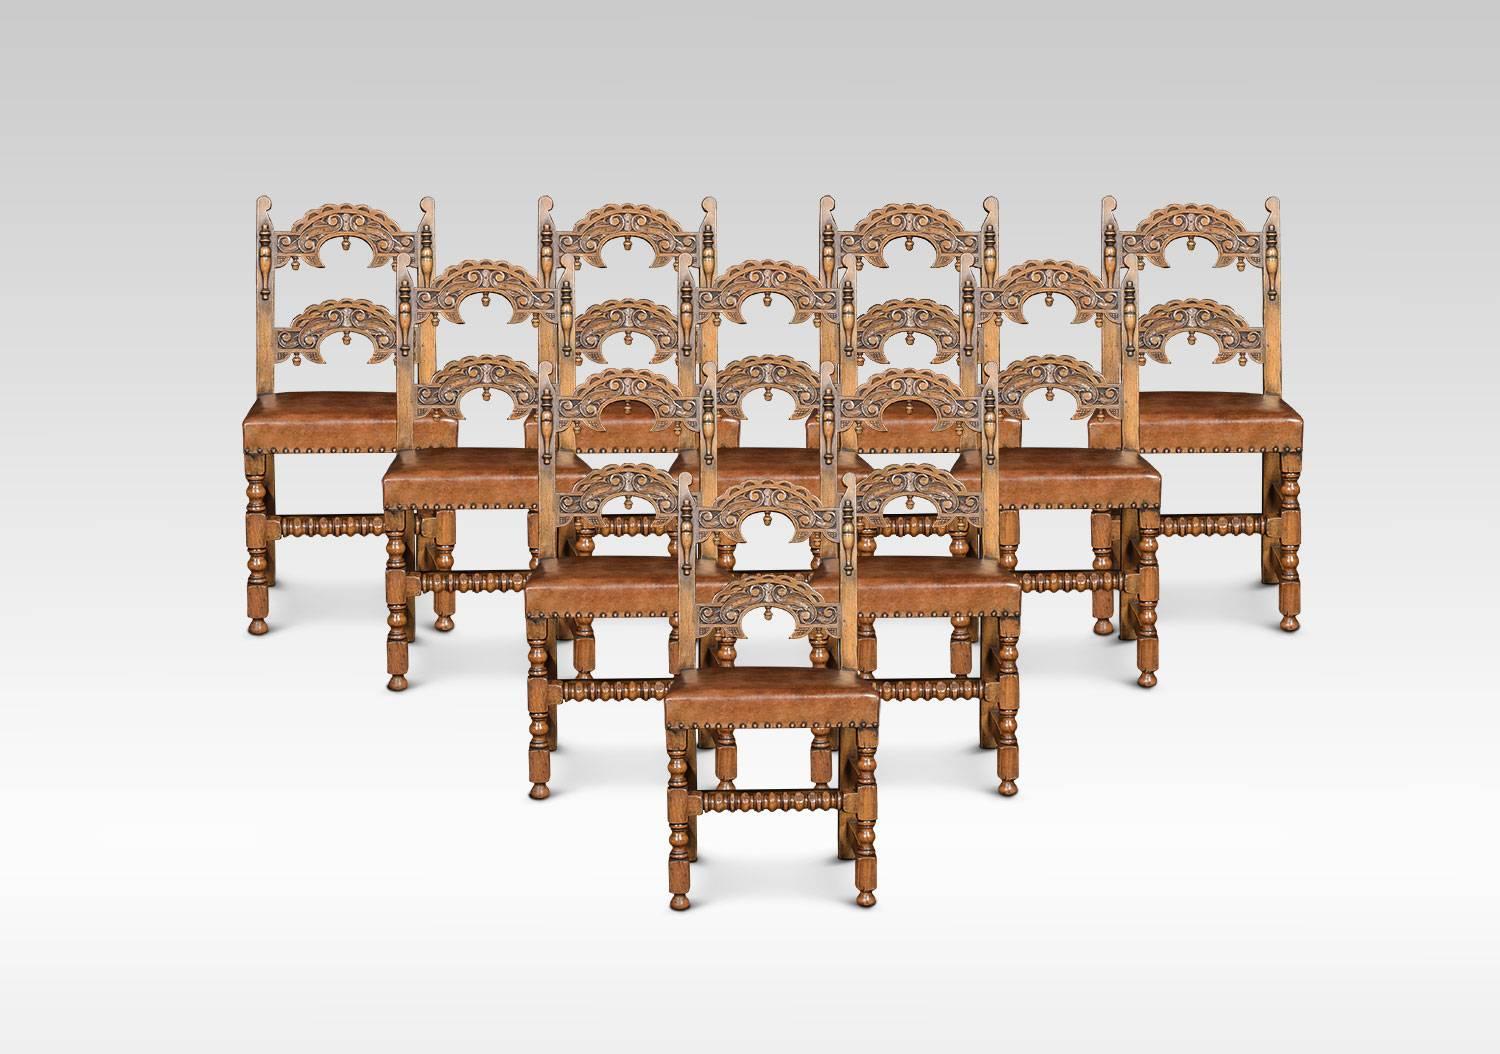 A set of twelve solid oak framed dining chairs, having arched supports with acorn drop finials above leather overstuffed seats with studded edges. All raised up on turned supports united by bobbin stretchers.
Dimensions

Armchairs
Height 37.5 Inches